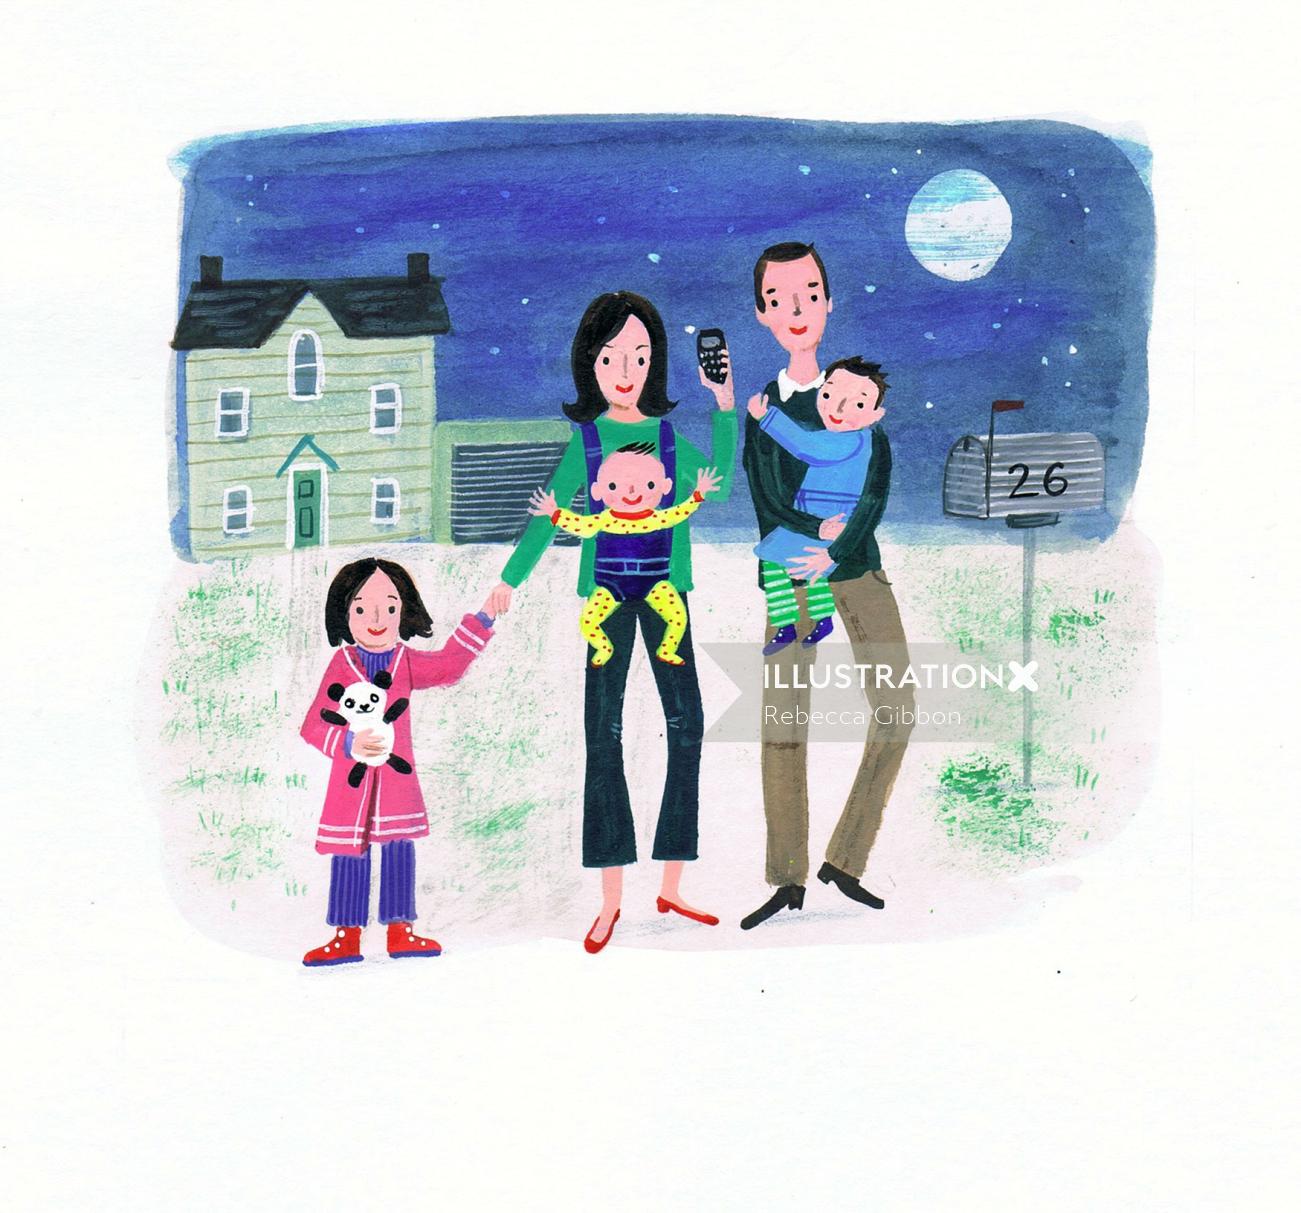 Parents are walking with children illustration